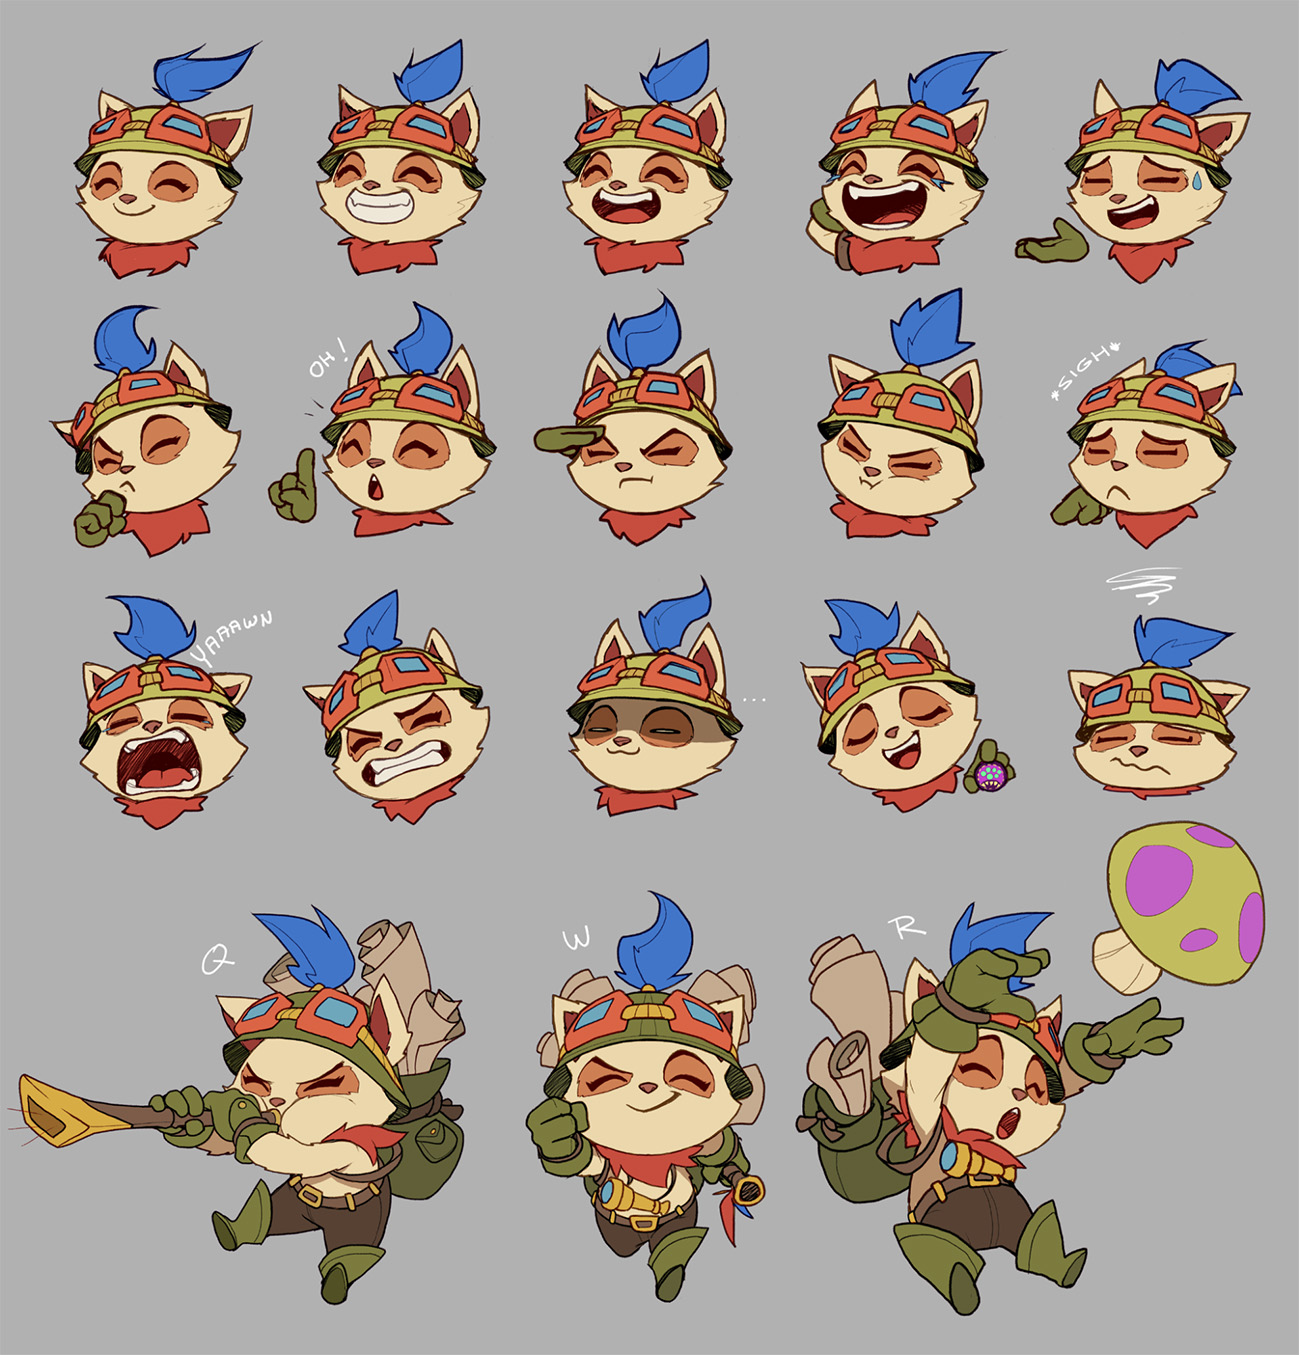 02_Teemo_Expressions.jpg